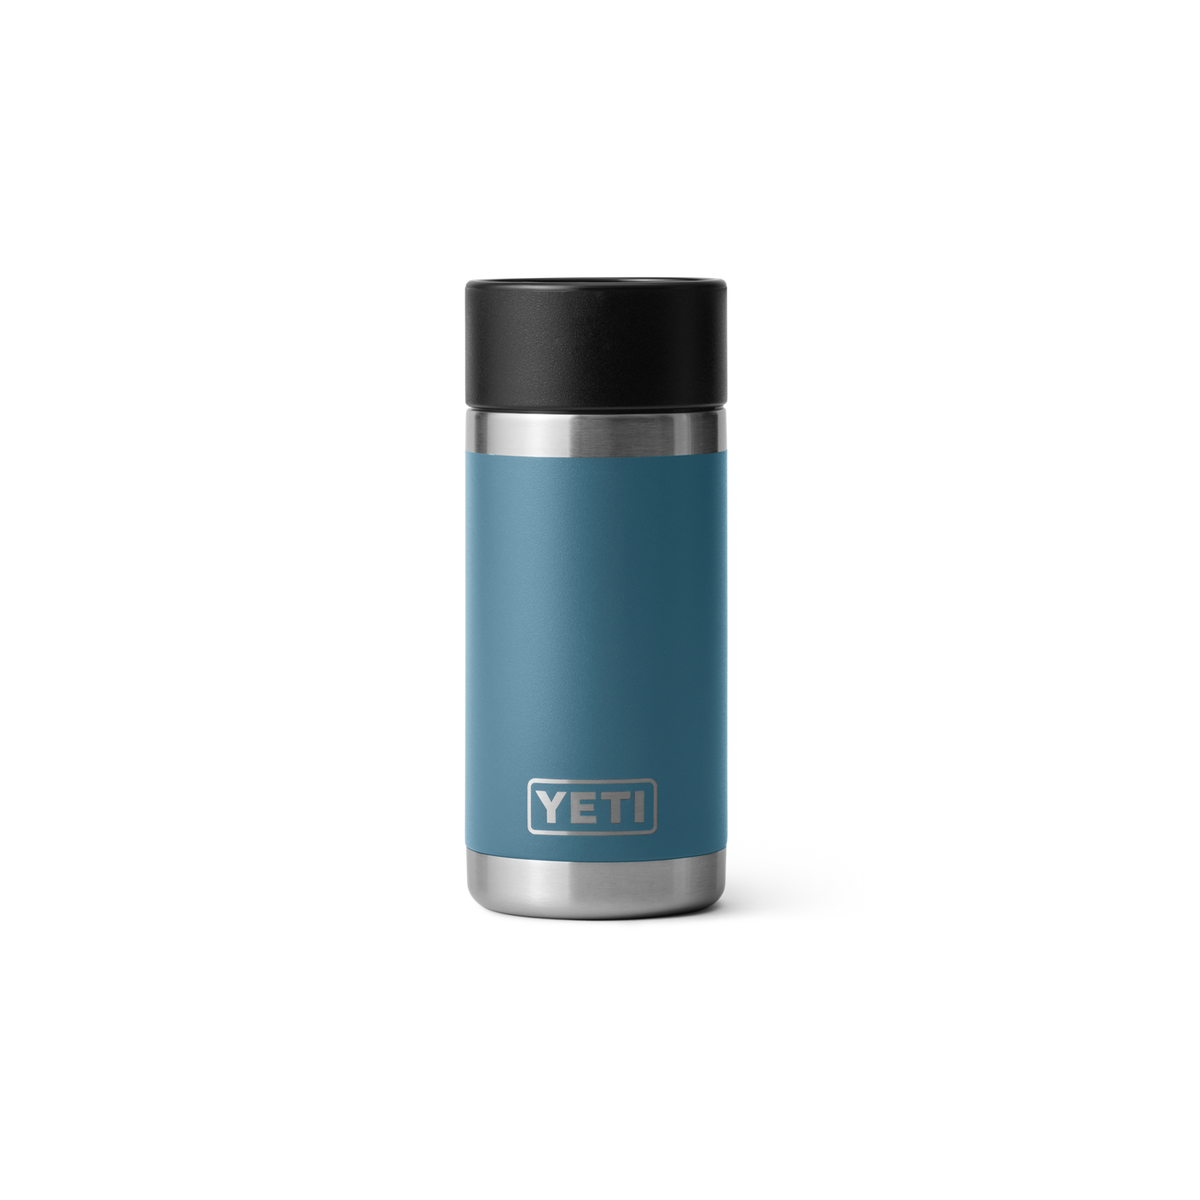 https://www.atlantagrillcompasny.shop/wp-content/uploads/1699/46/yeti-rambler-12-oz-bottle-with-hotshot-cap-yeti-outlet-sale-find-the-latest-trends-in-fashion-and-shop-now_0.png